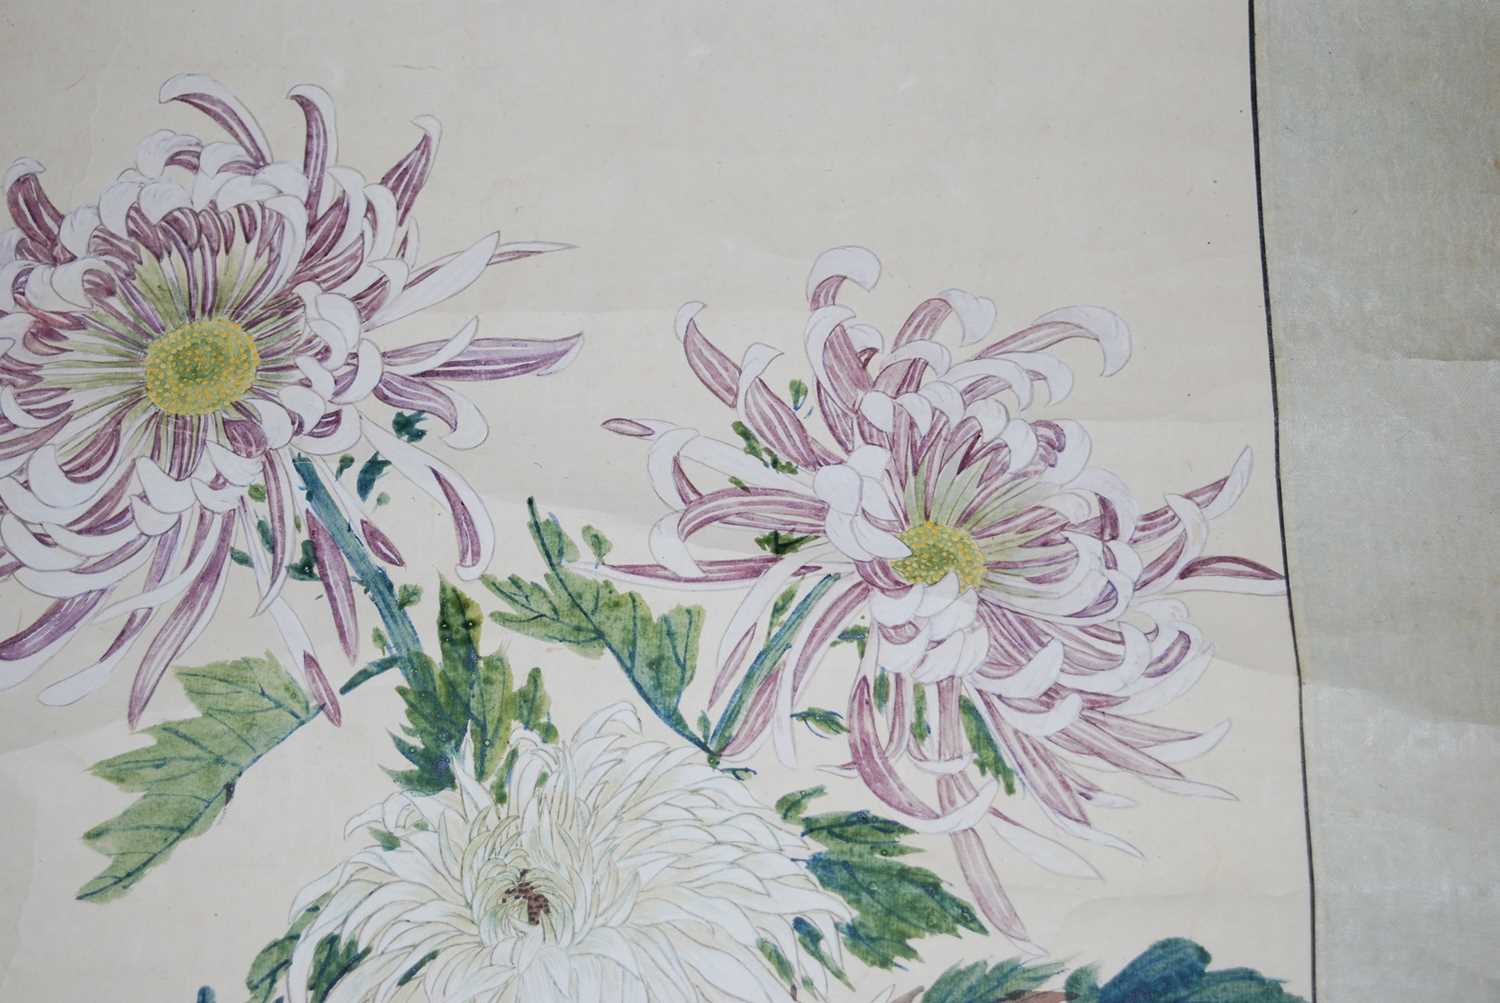 Yuan Yunyi (袁韻宜) (1920-2004) - Chrysanthemums, Republic of China scroll painting dated 1944, ink - Image 28 of 31